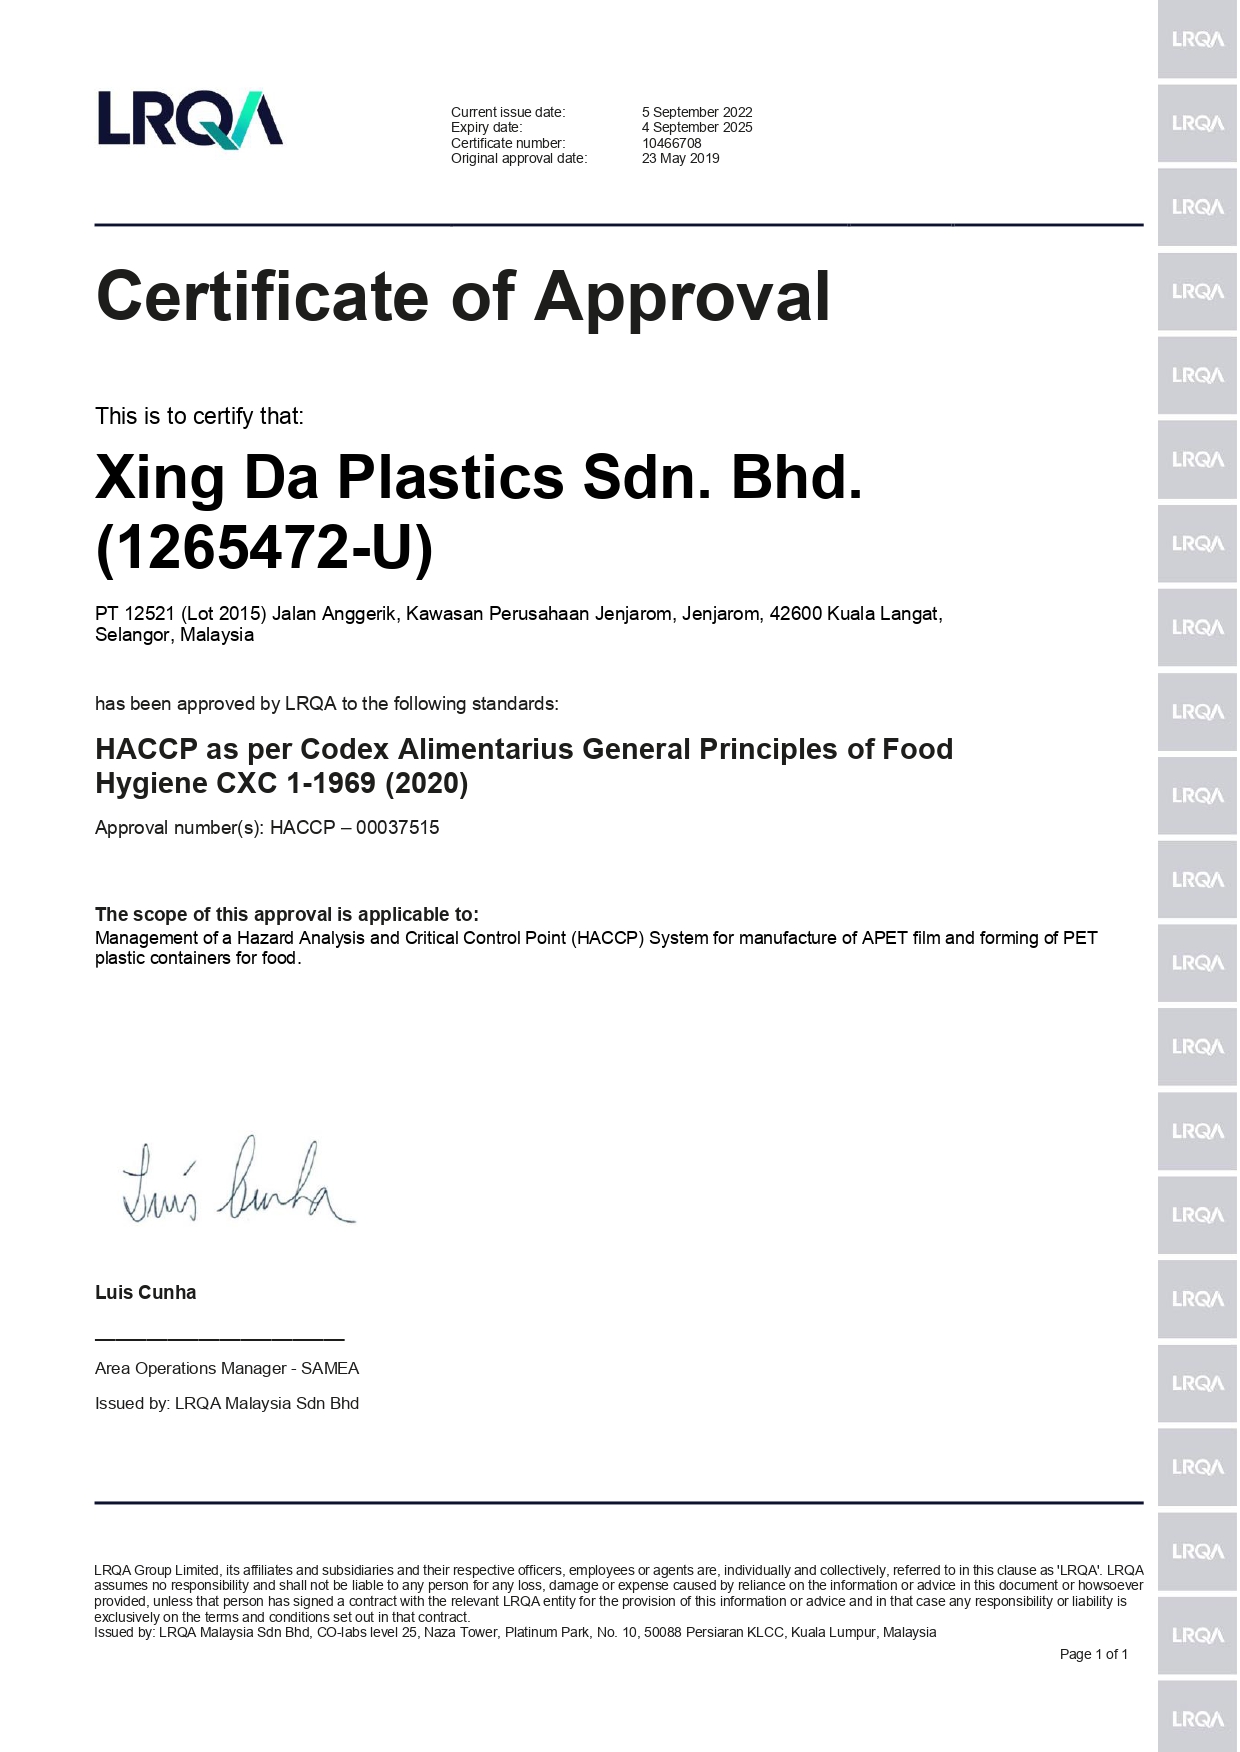 Xing Da Plastics | Malaysia Plastic Supplier & Manufacturer | Specialised in upcycling polyethylene terephthalate (PET) | Disposable Plastic Tray | Disposable Plastic Container | Pioneers in polymer engineering | Professional Handling | Xing Da Malaysia- HACCP ENGUS 2022